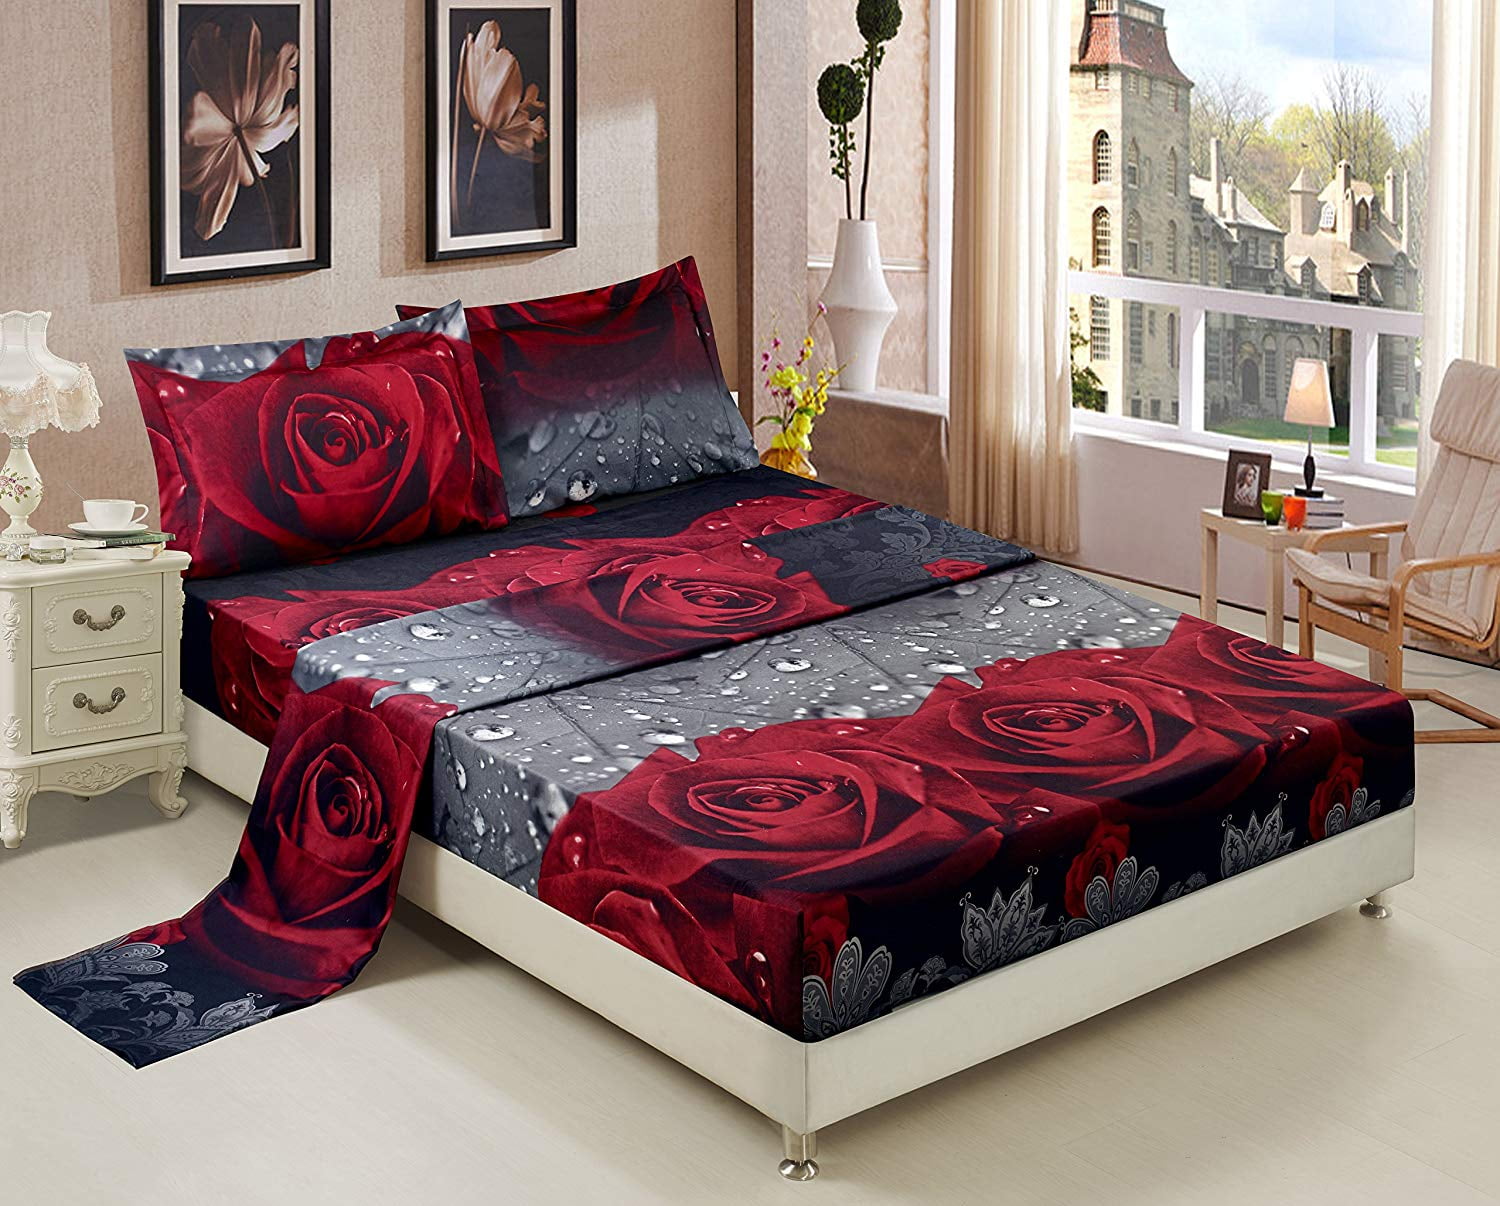 Details about   Warm Flannel Band Fitted Sheet 3D Print Floral Plush Bed Sheet and Pillowcases 